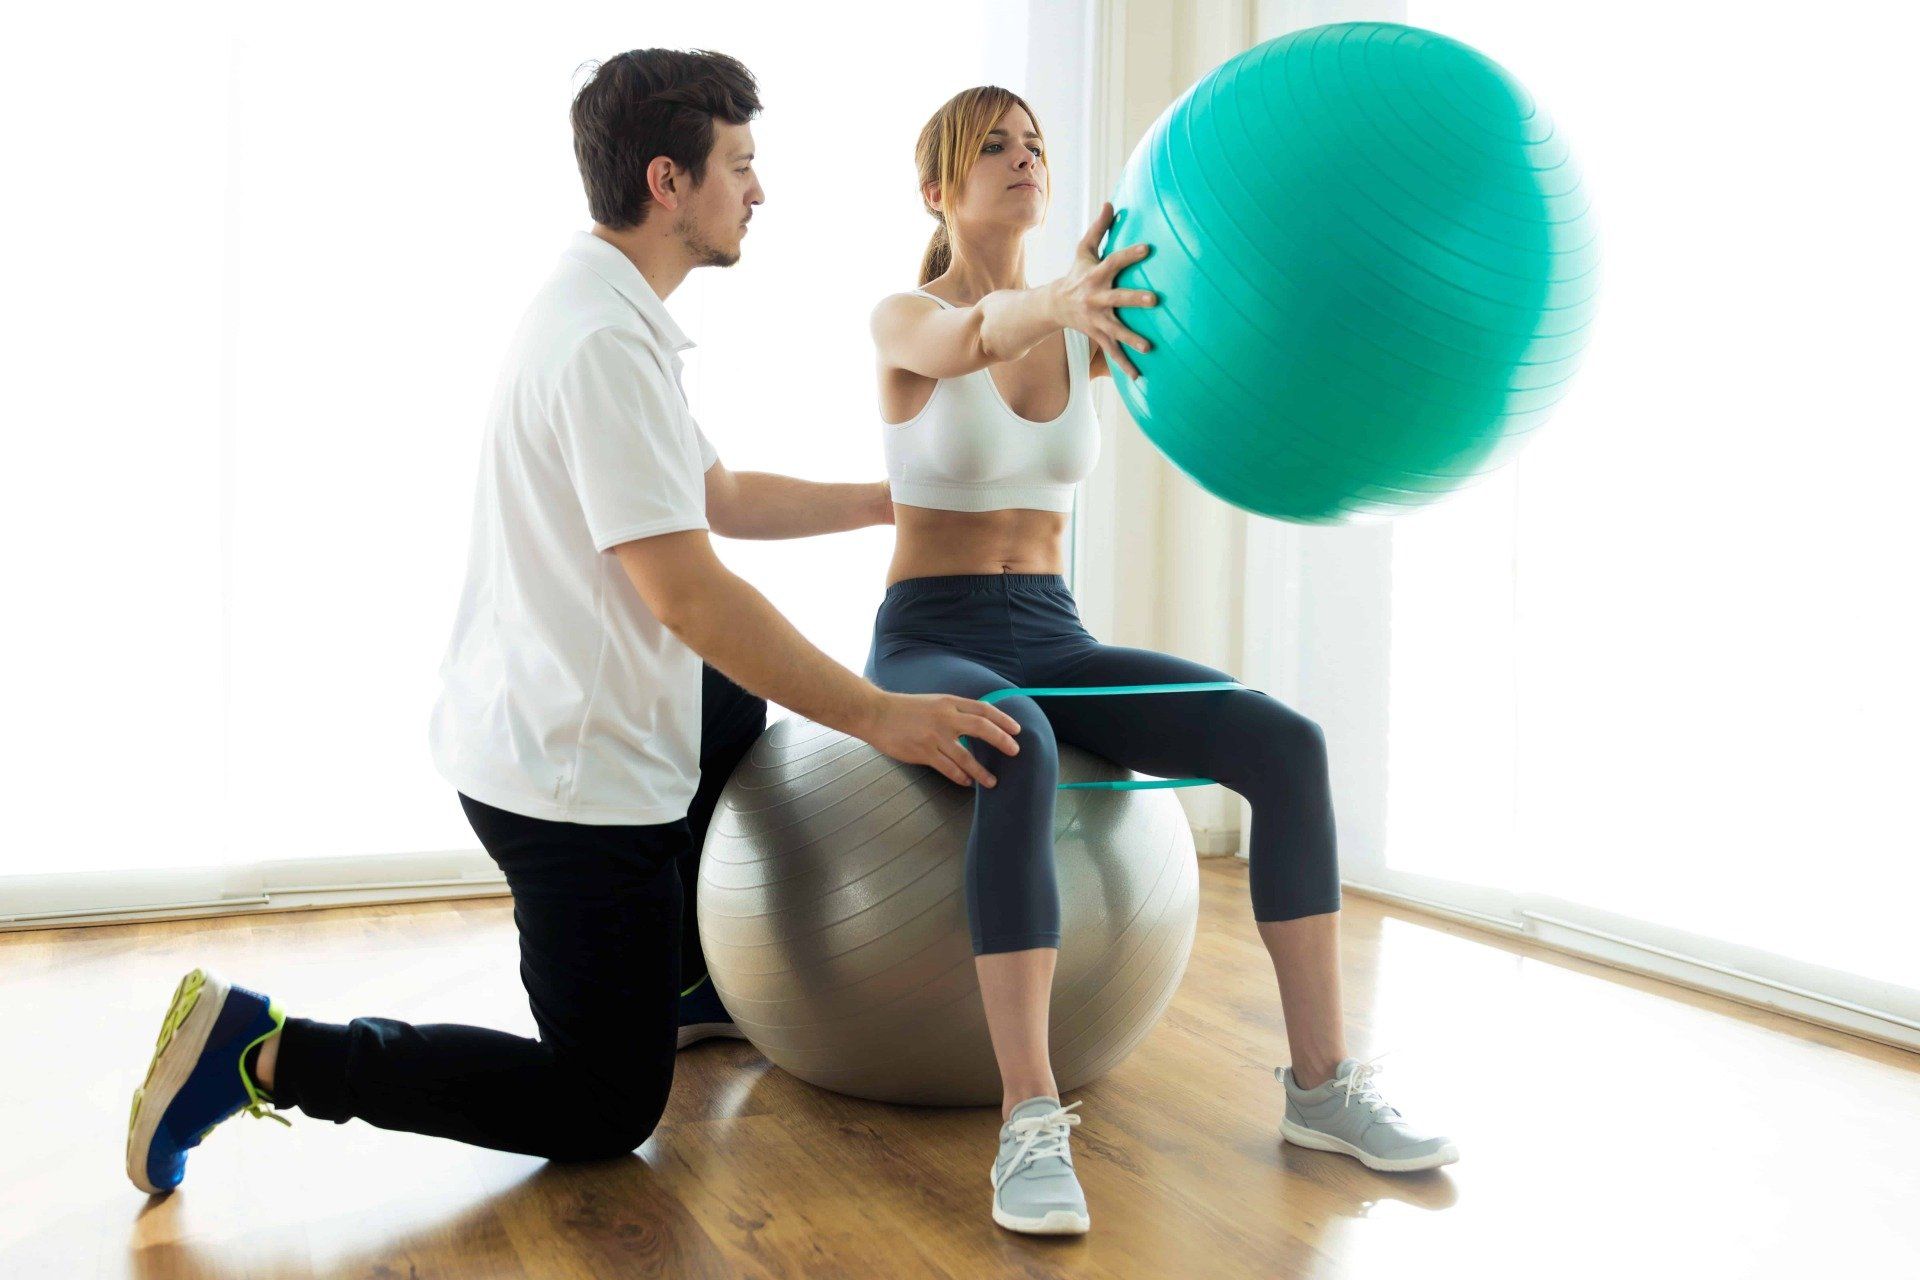 Physiotherapist is helping a woman exercise on a pilates ball.